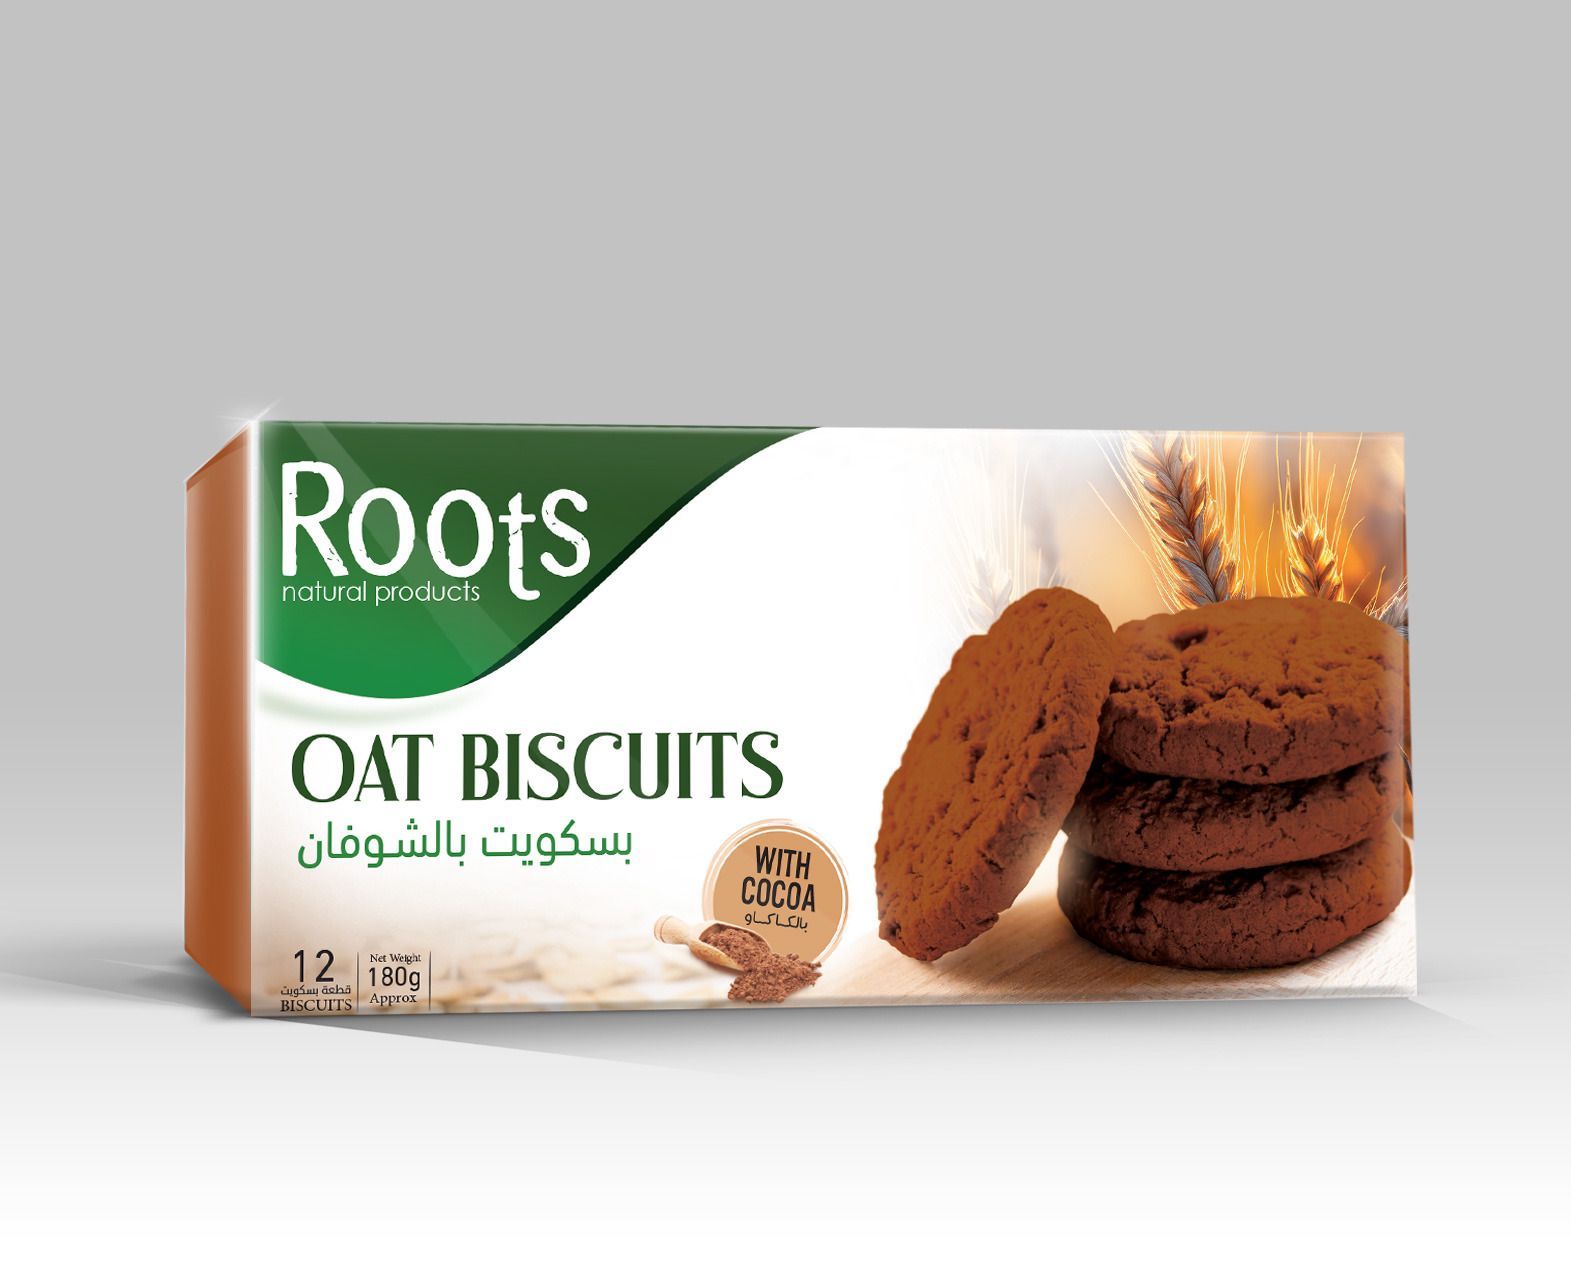 Roots Oat Biscuits with Cocoa 12 piece